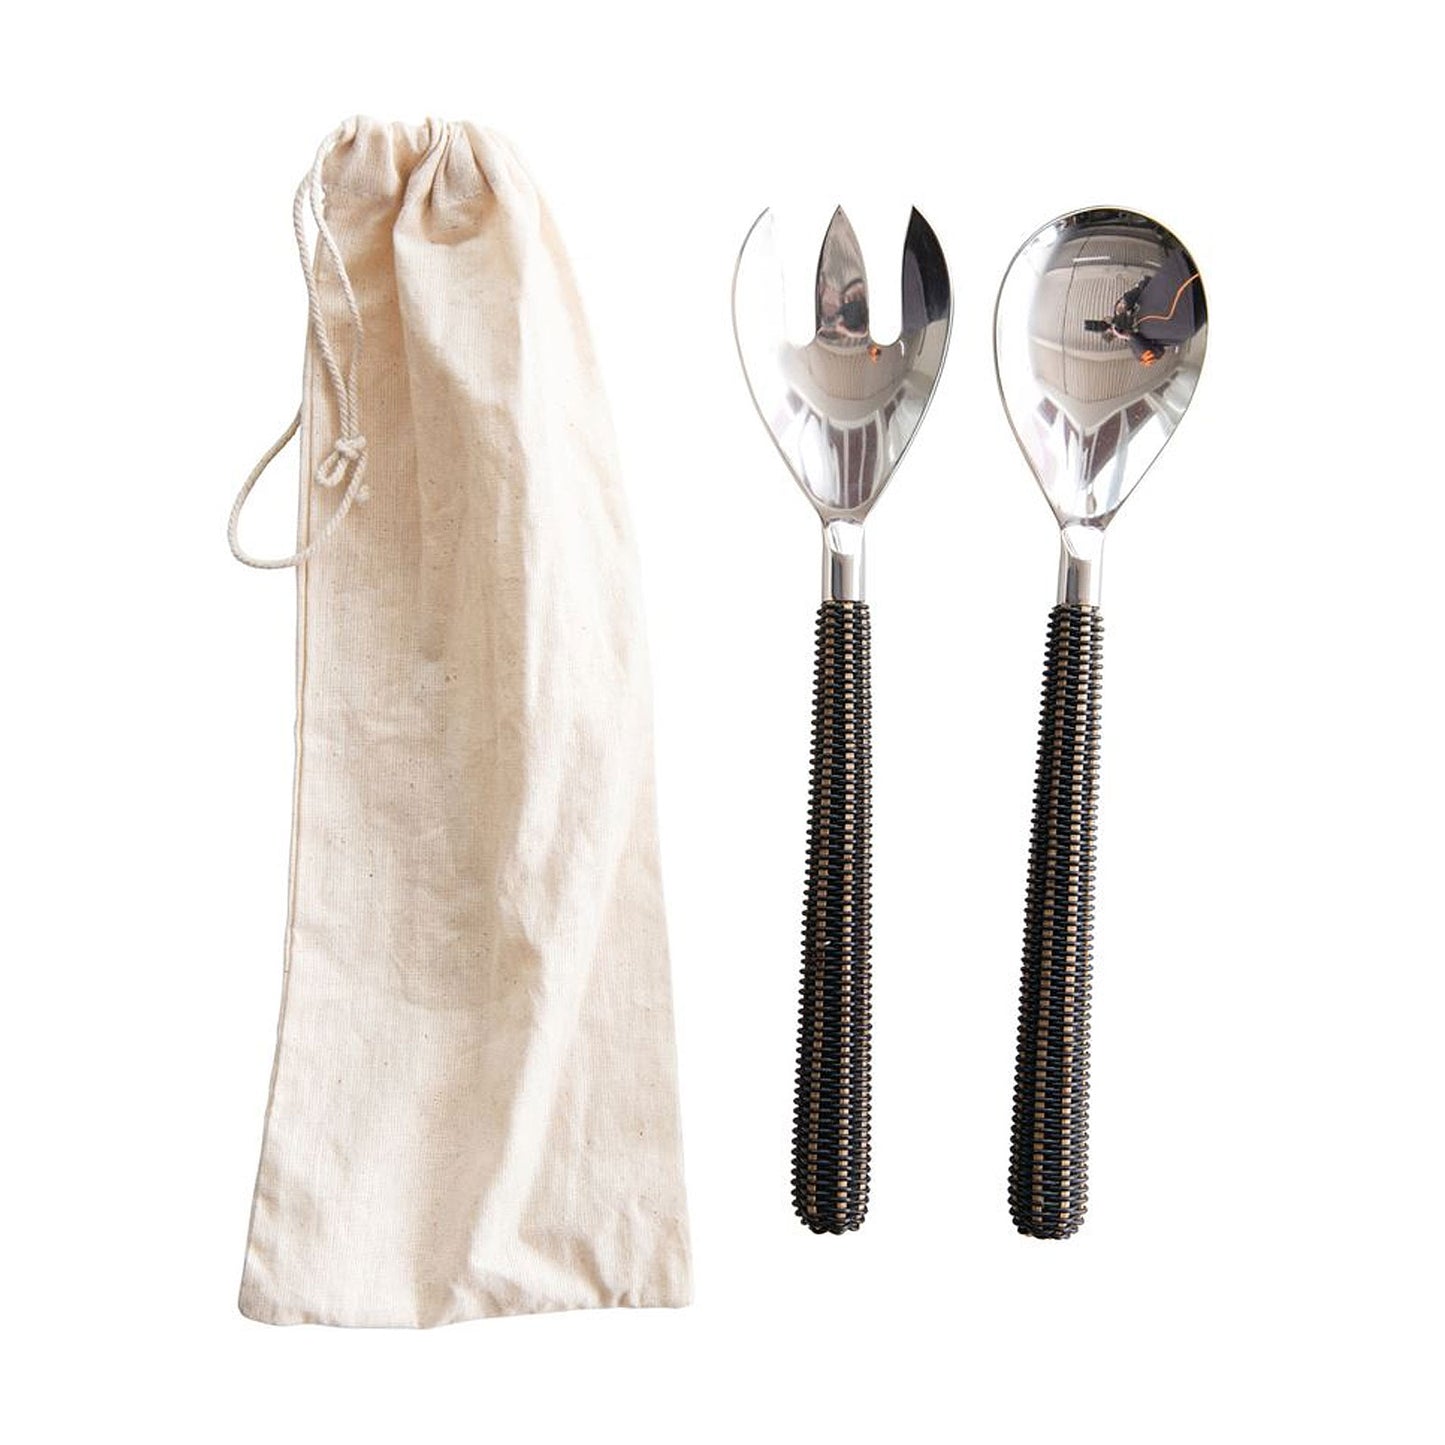 Stainless Steel Salad Servers, Woven Handle